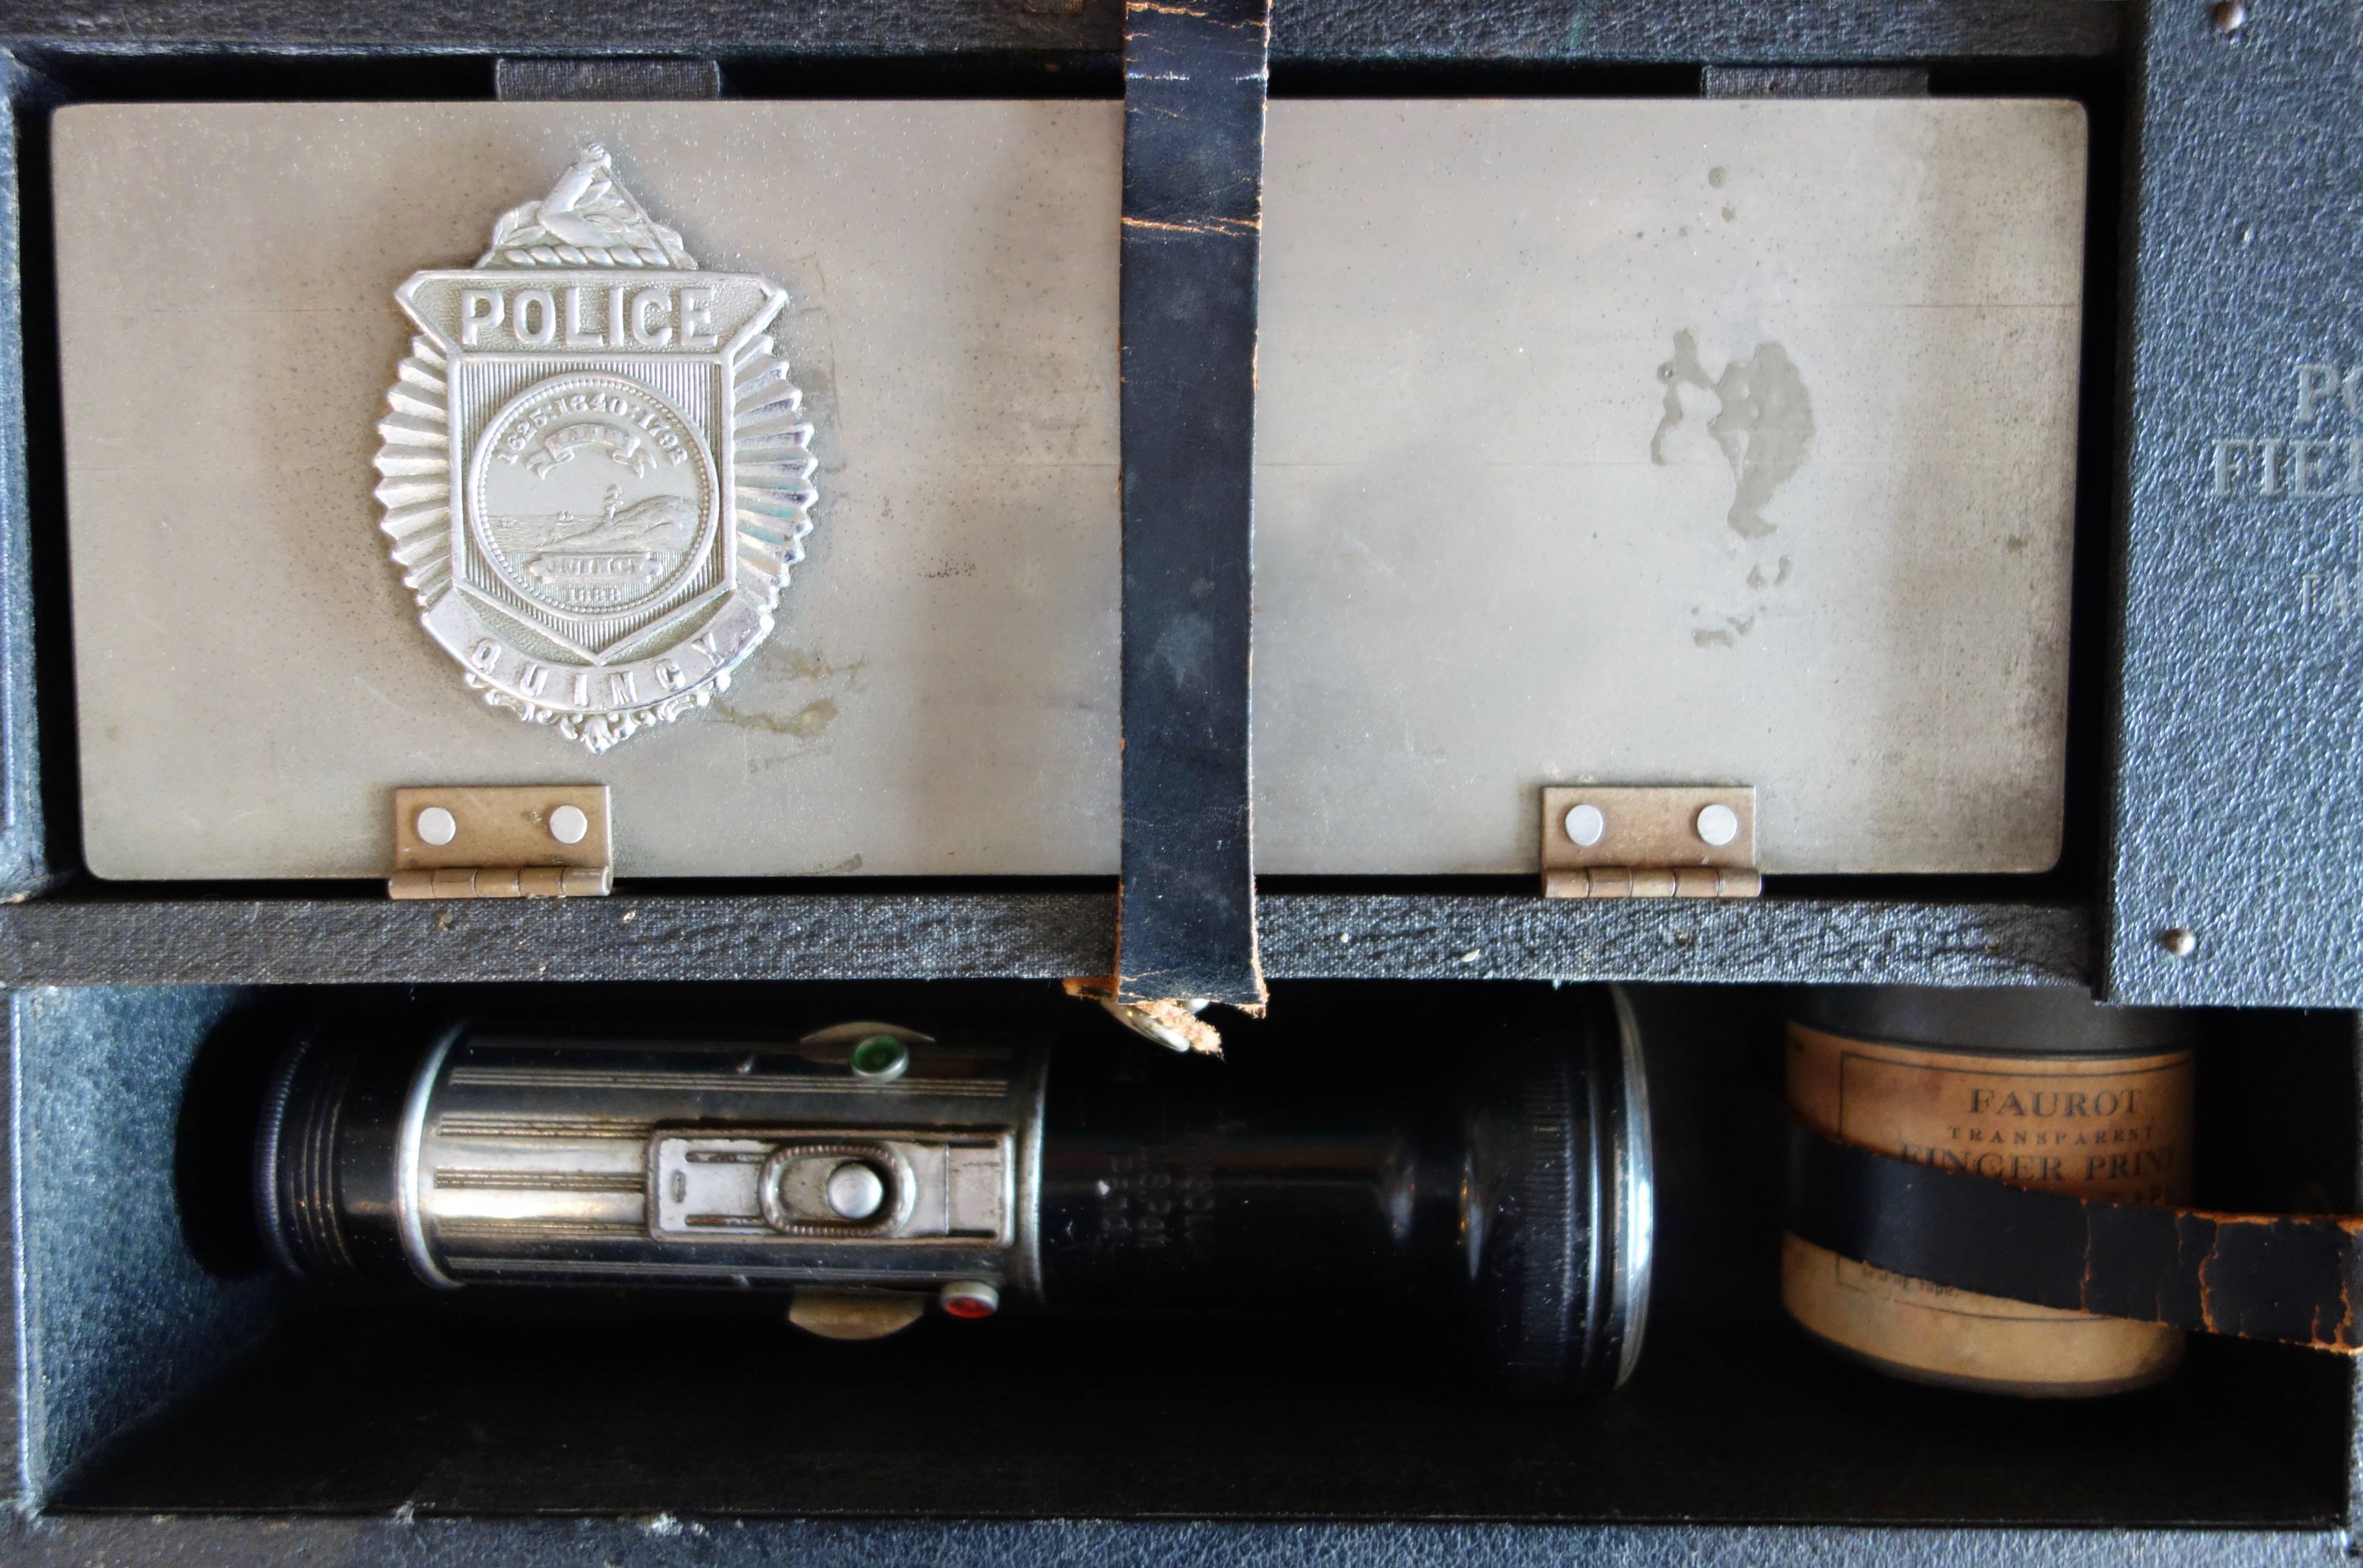 Police Detective Crime Scene Kit, Made by Farout Forensic Products, Massachusett 3